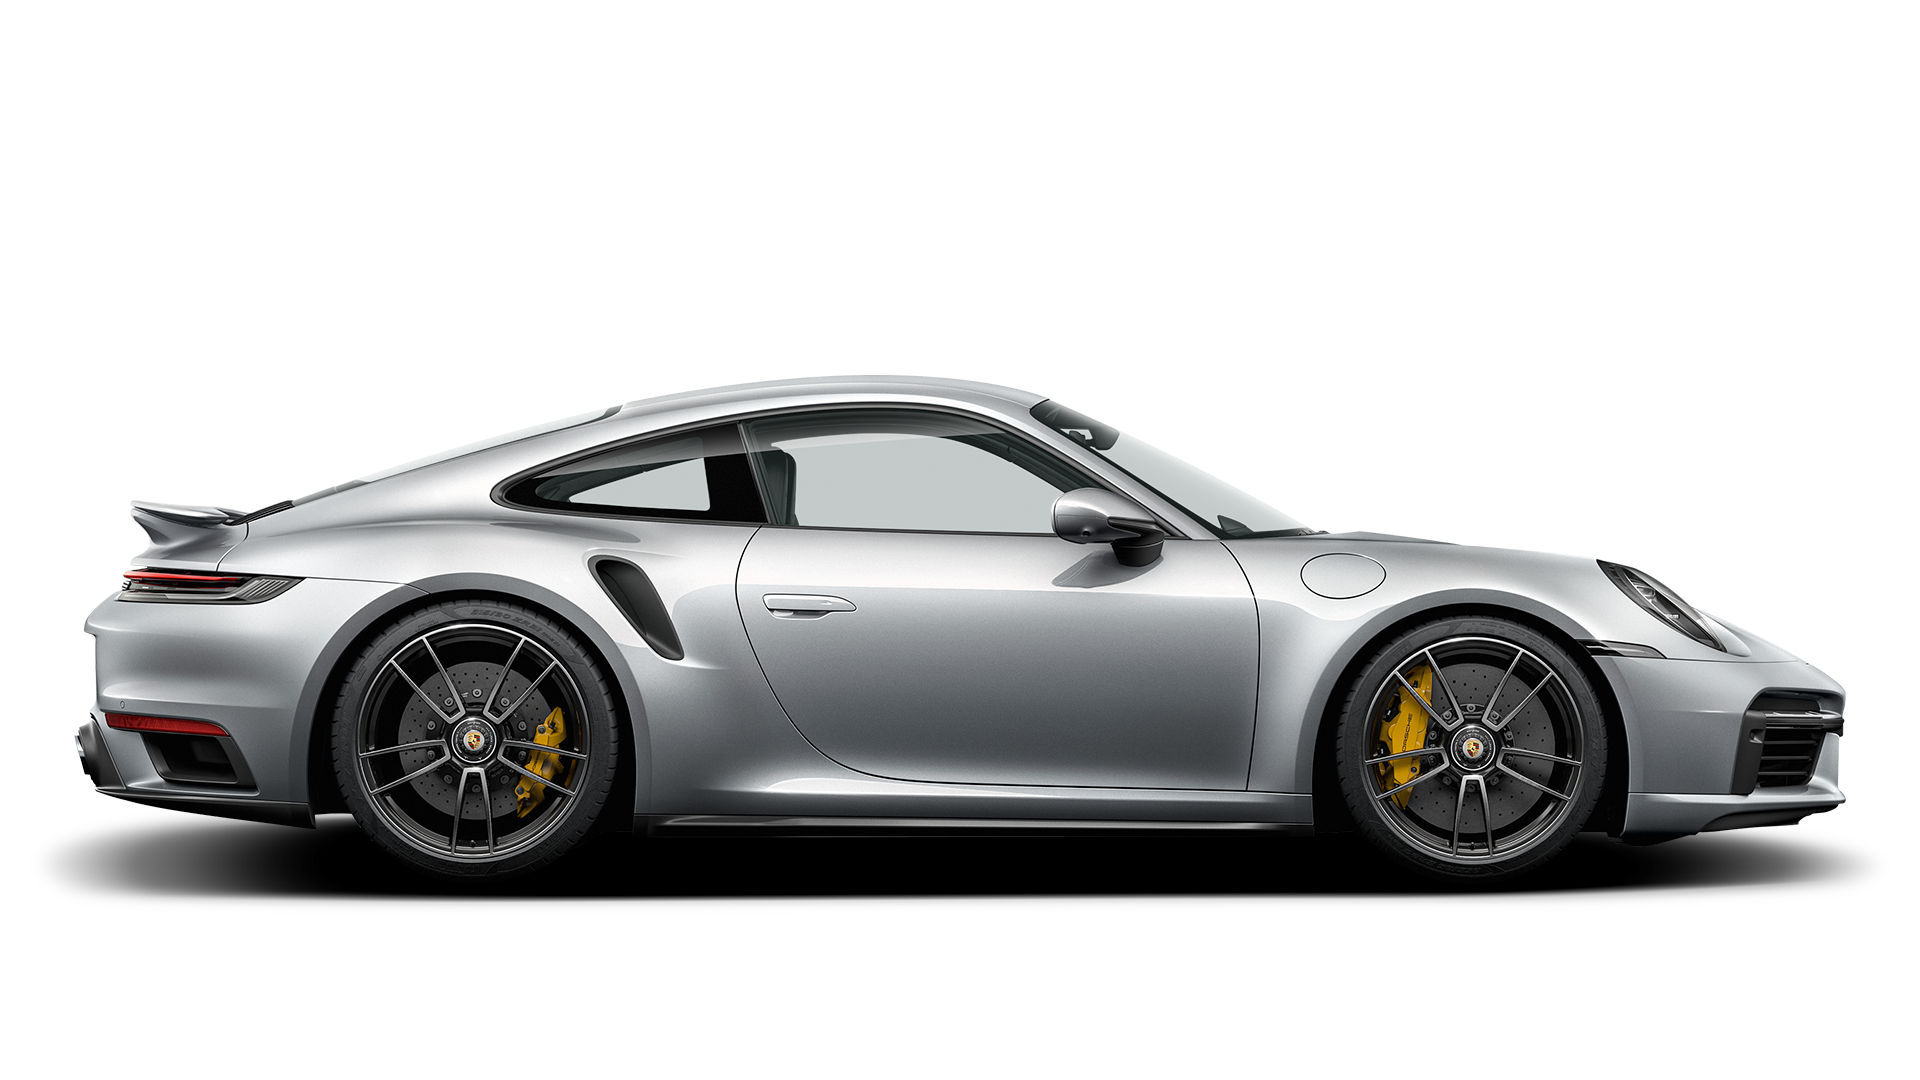 Get pre-owned Porsche cars for sale online